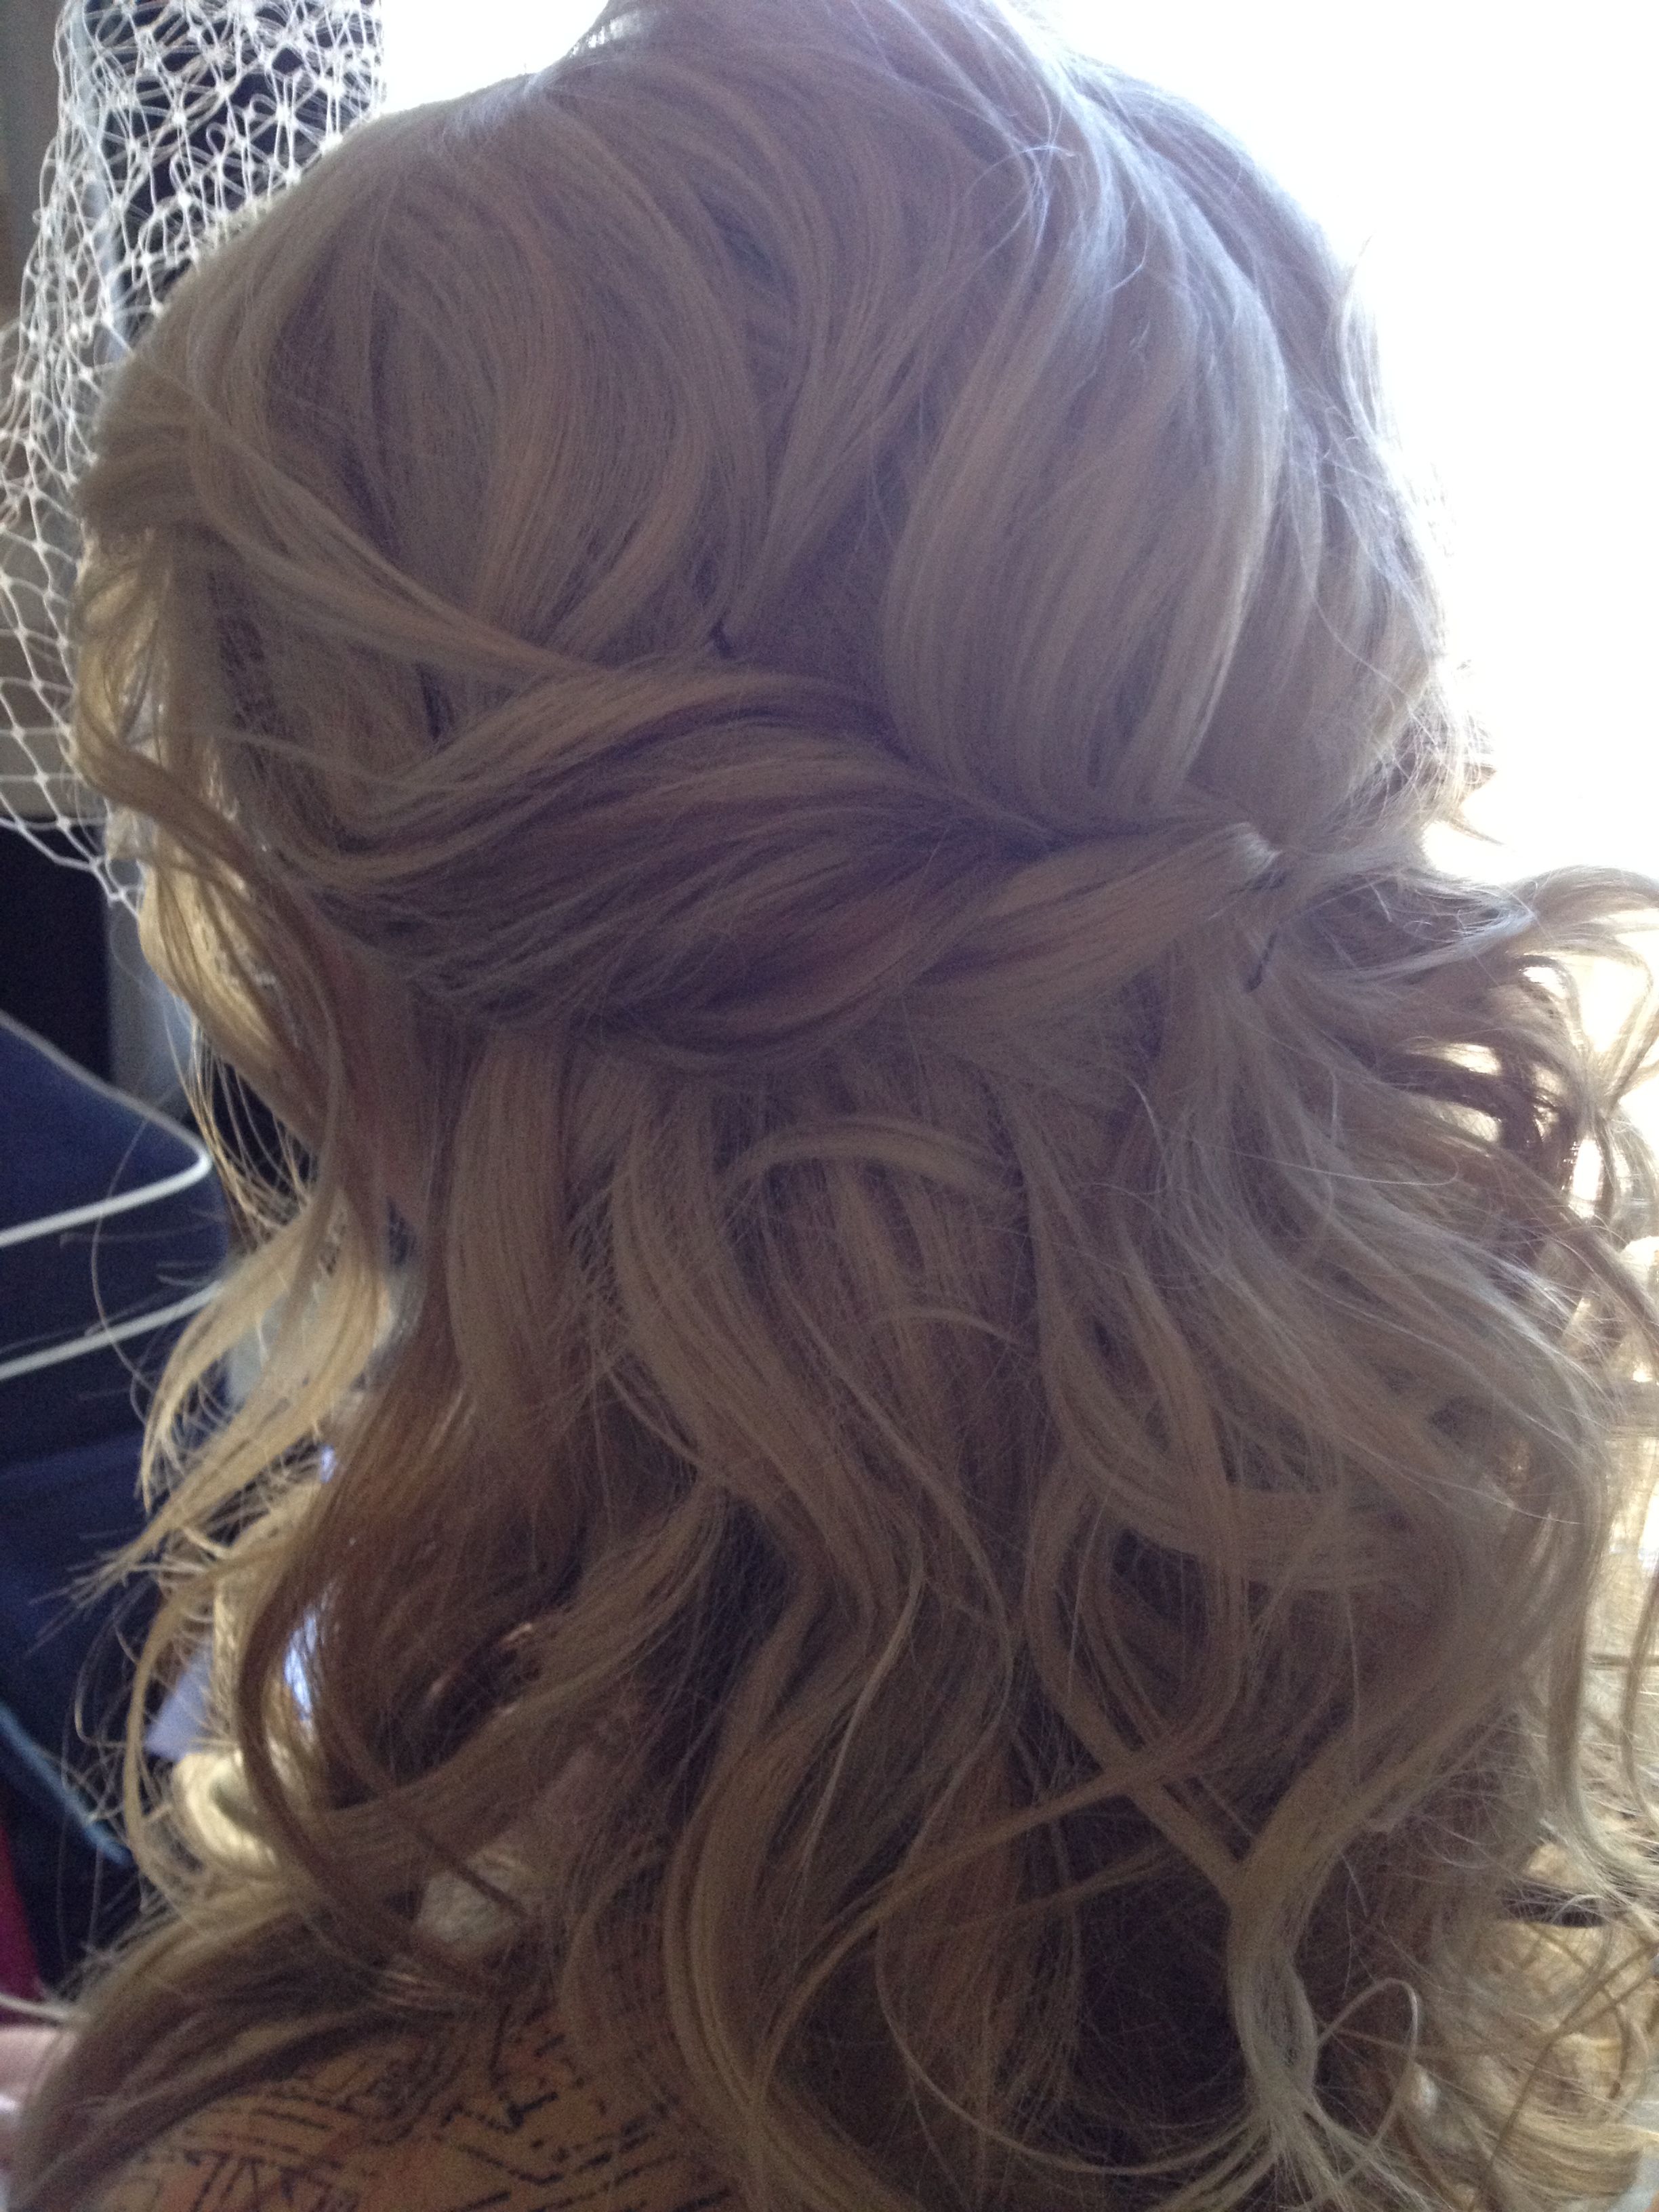 Current Loose Curly Half Updo Wedding Hairstyles With Bouffant With Curly Half Up Wedding Hairstyles (View 14 of 20)